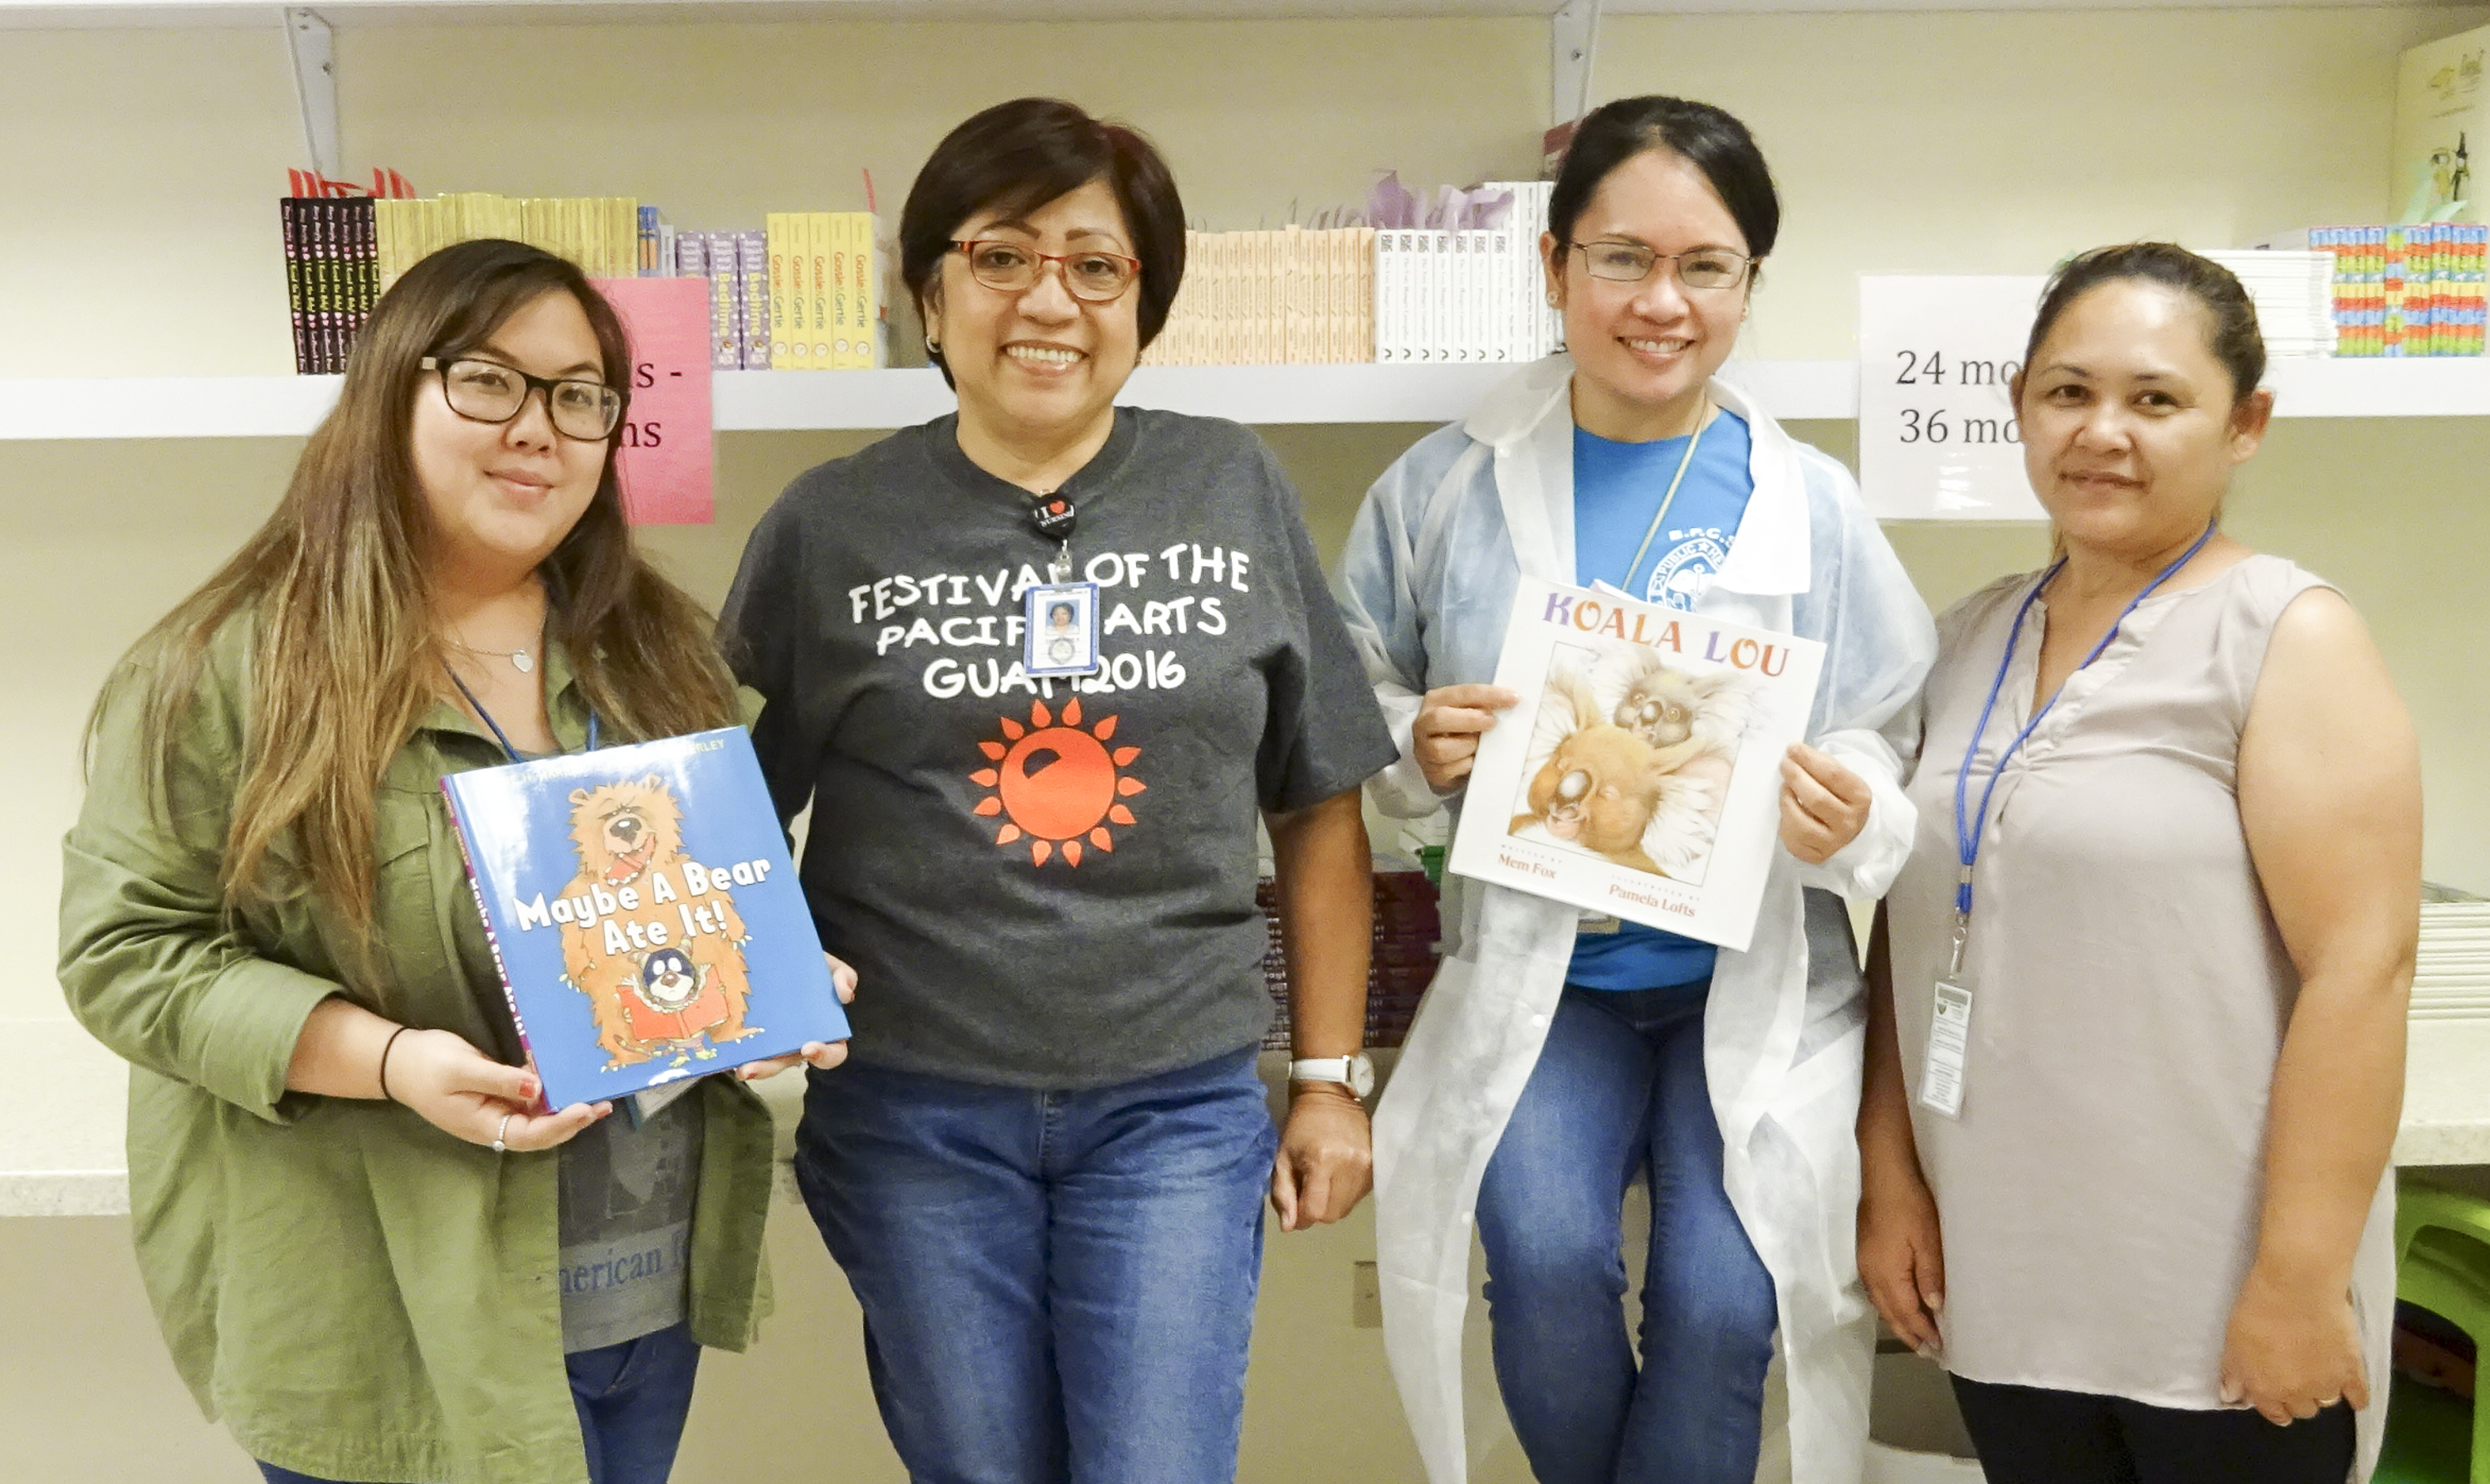 Jenika Ballesta, Guam CEDDERS (far left), and Coleen Dela Cruz, Guam CEDDERS (far right), presented books to the staff of Southern Region Community Health Center on July 1 as part of the Reach Out and Read Program.